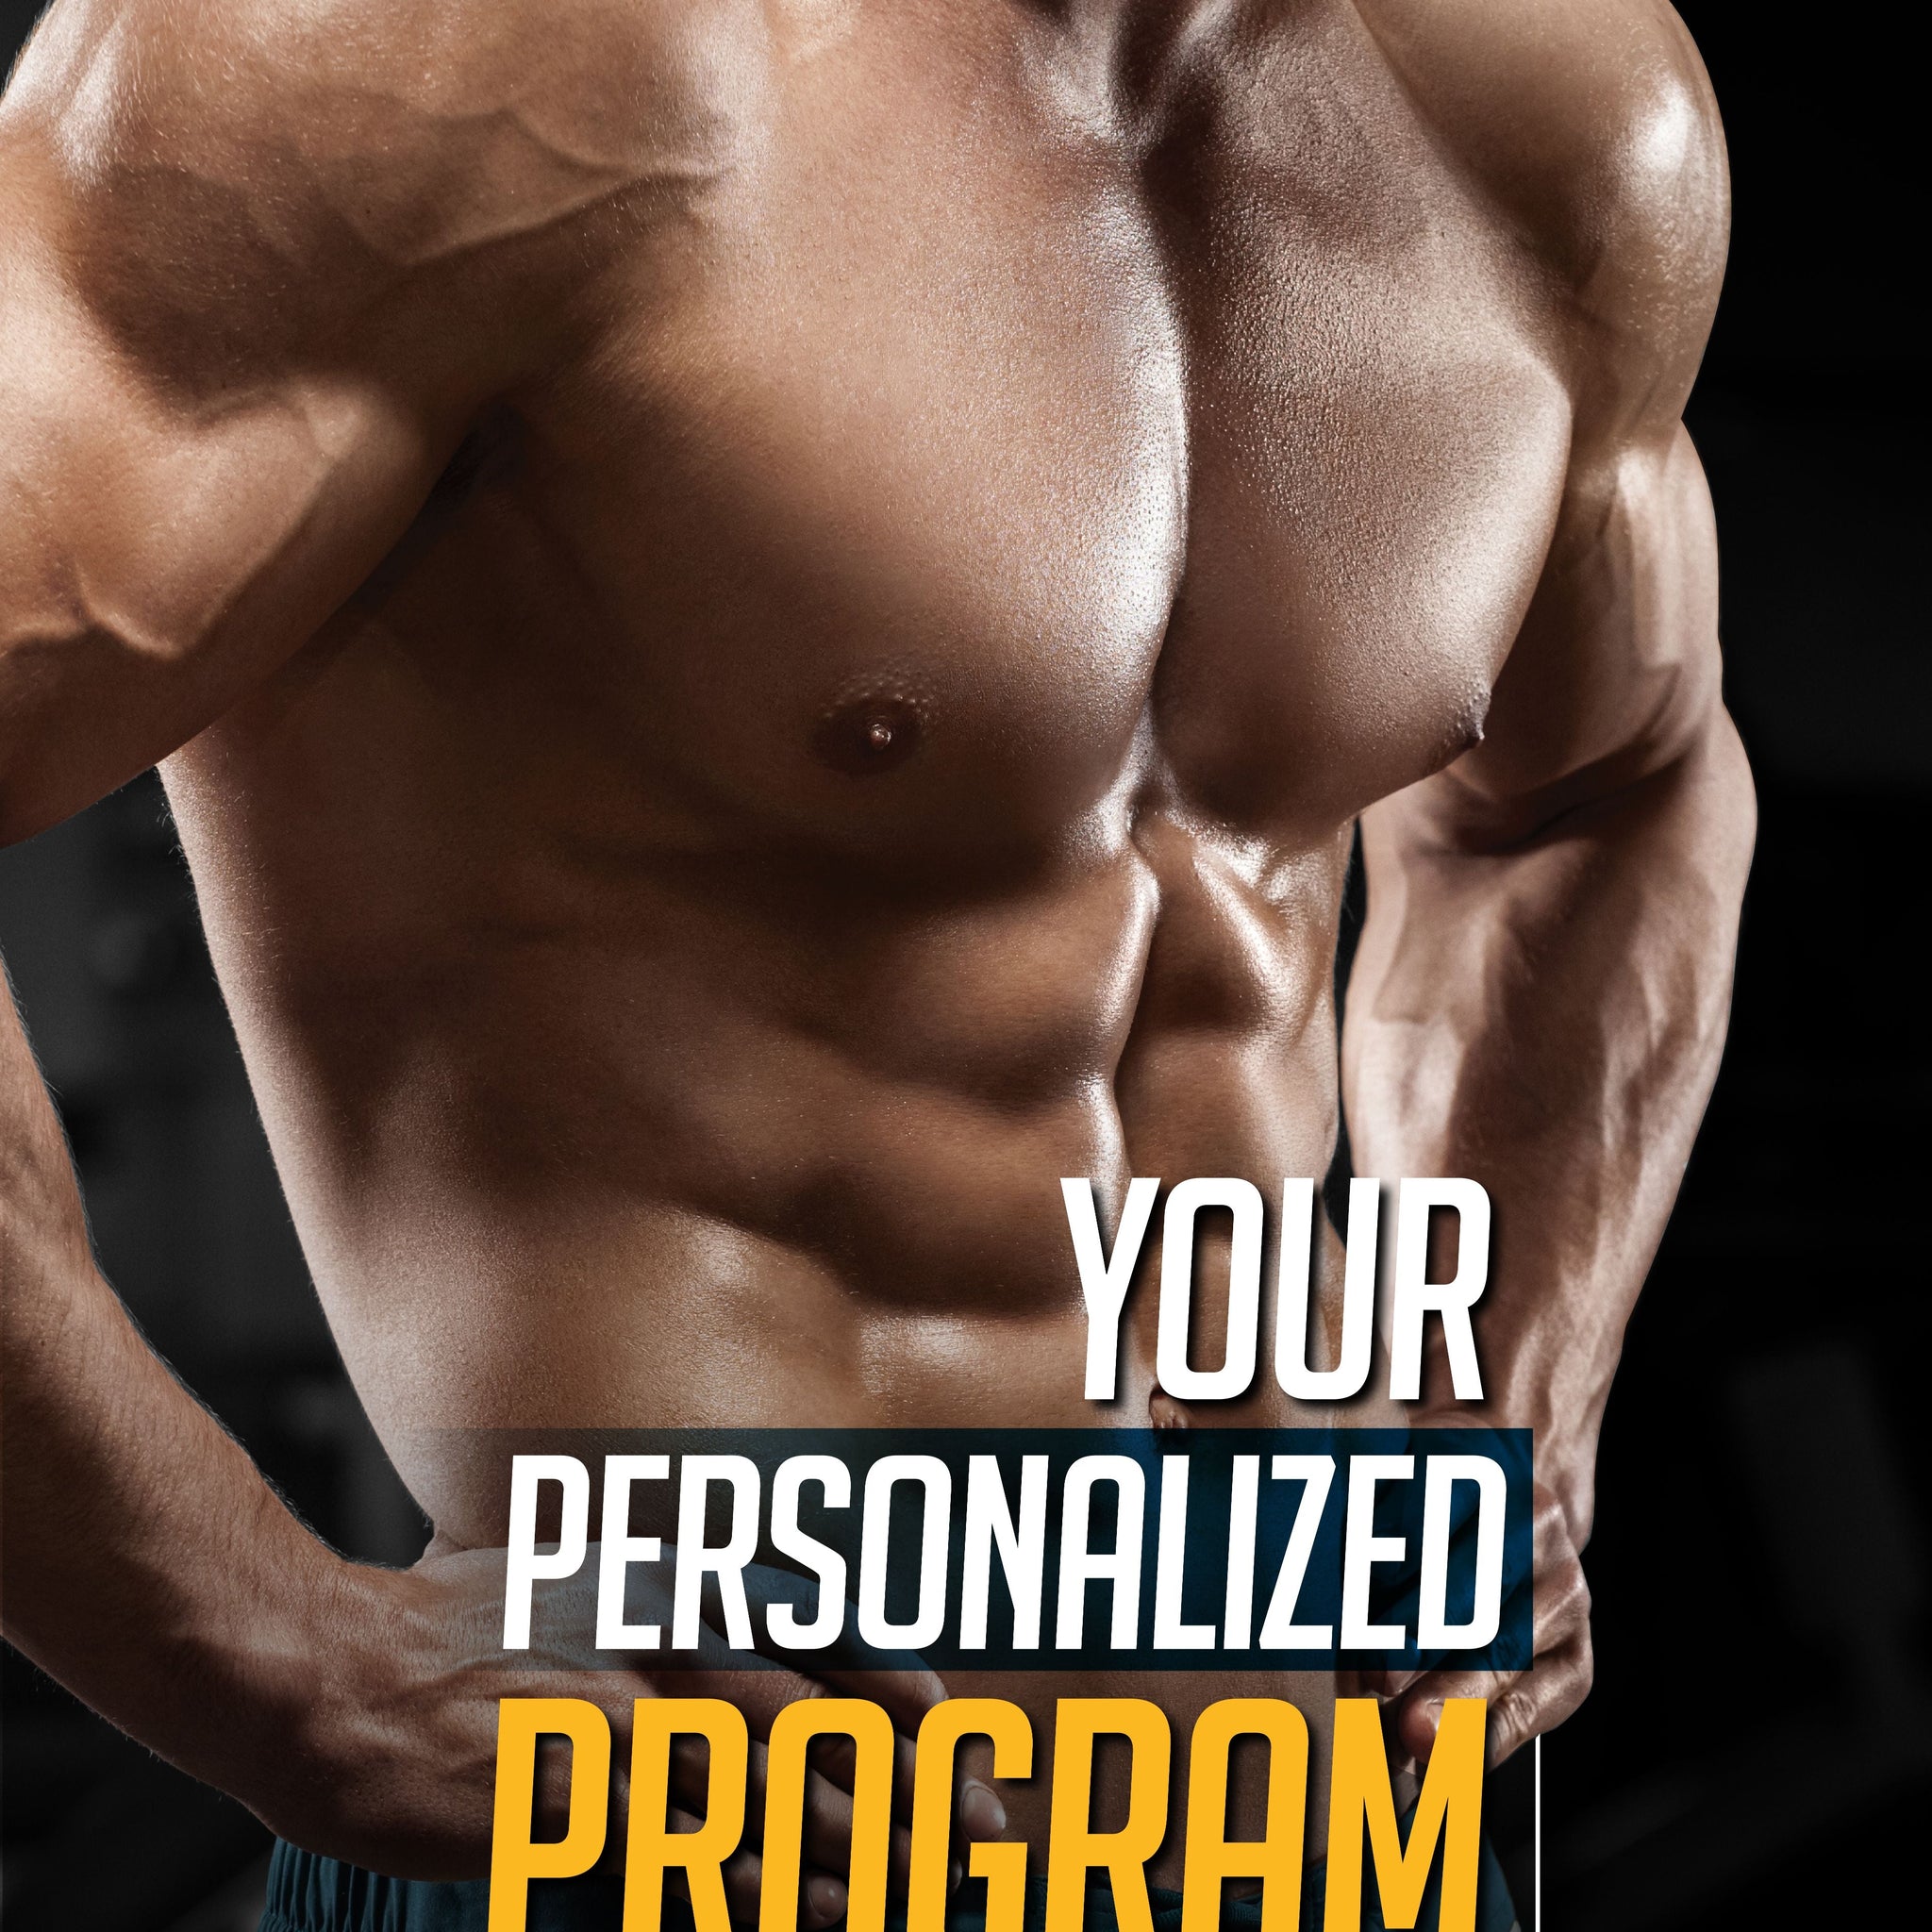 4 Month Personalized Premium Plan - Shred.